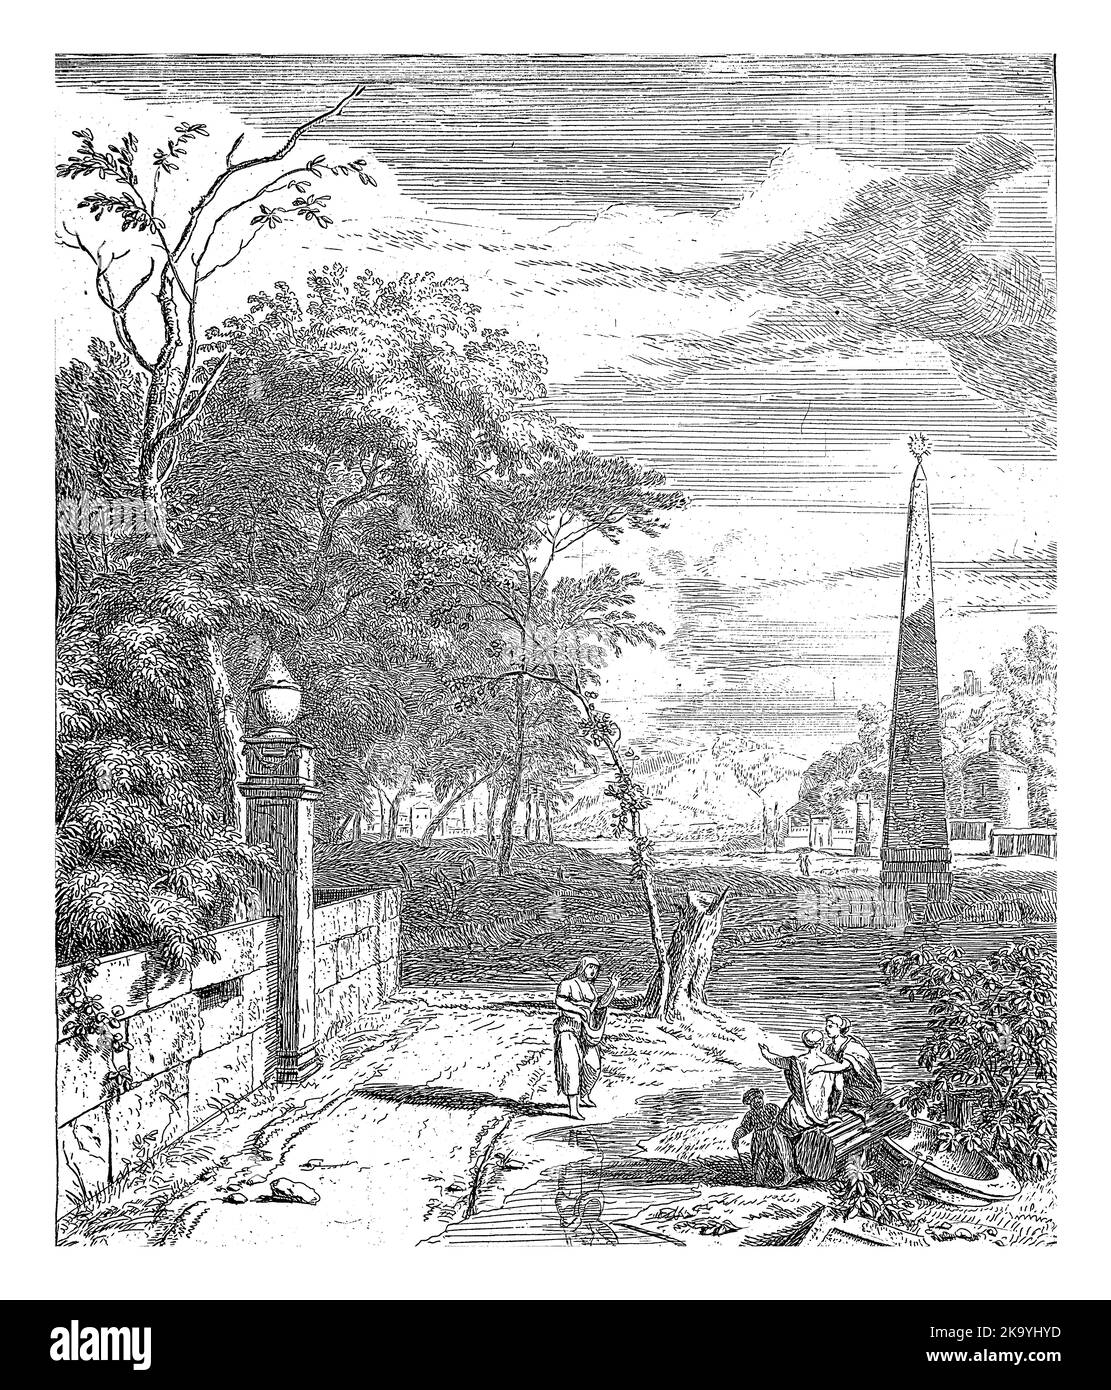 Landscape with an obelisk and a garden wall. In the foreground three women and a child along a stream. Stock Photo